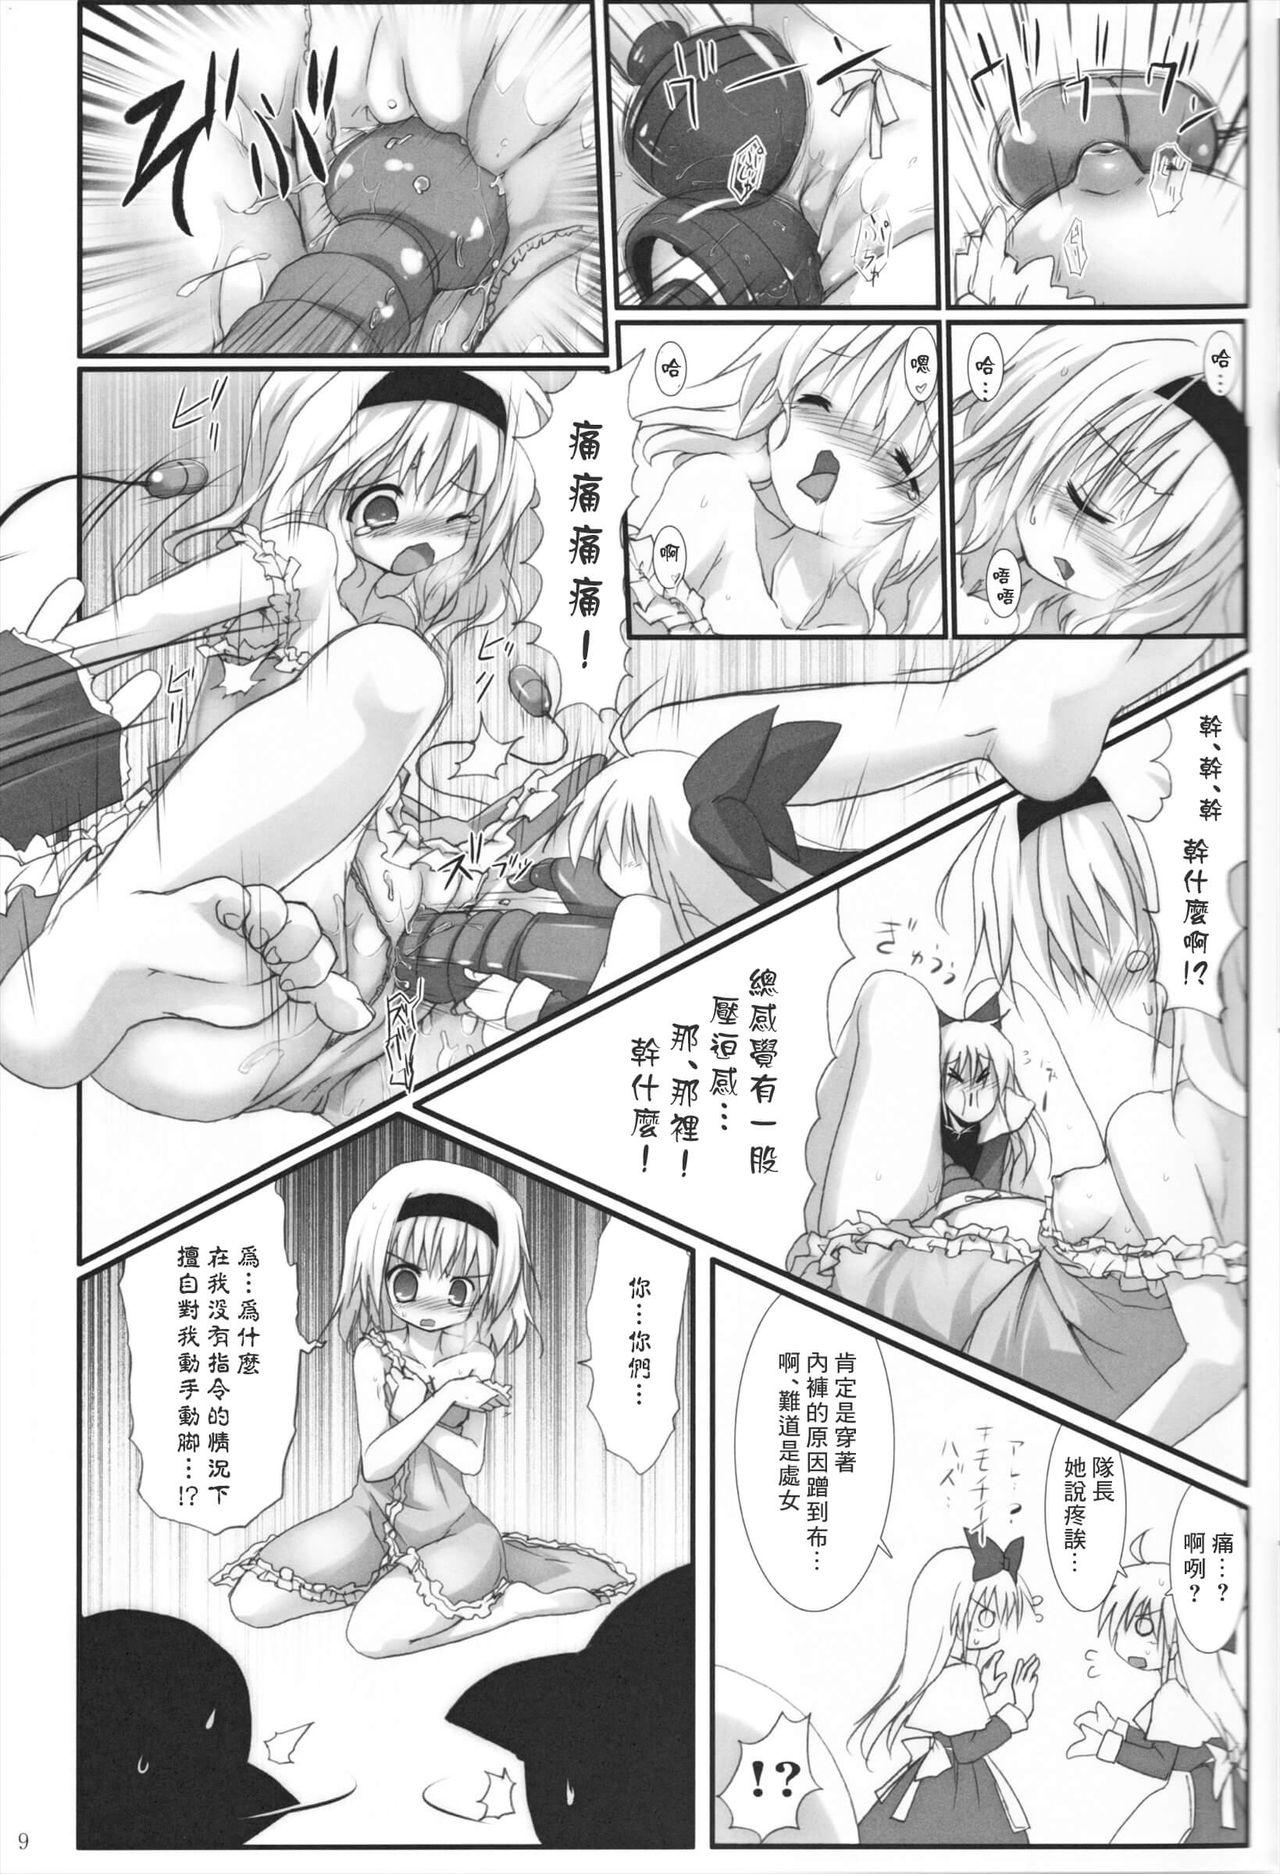 Lingerie Alice in Nightmare - Touhou project Web Cam - Page 10